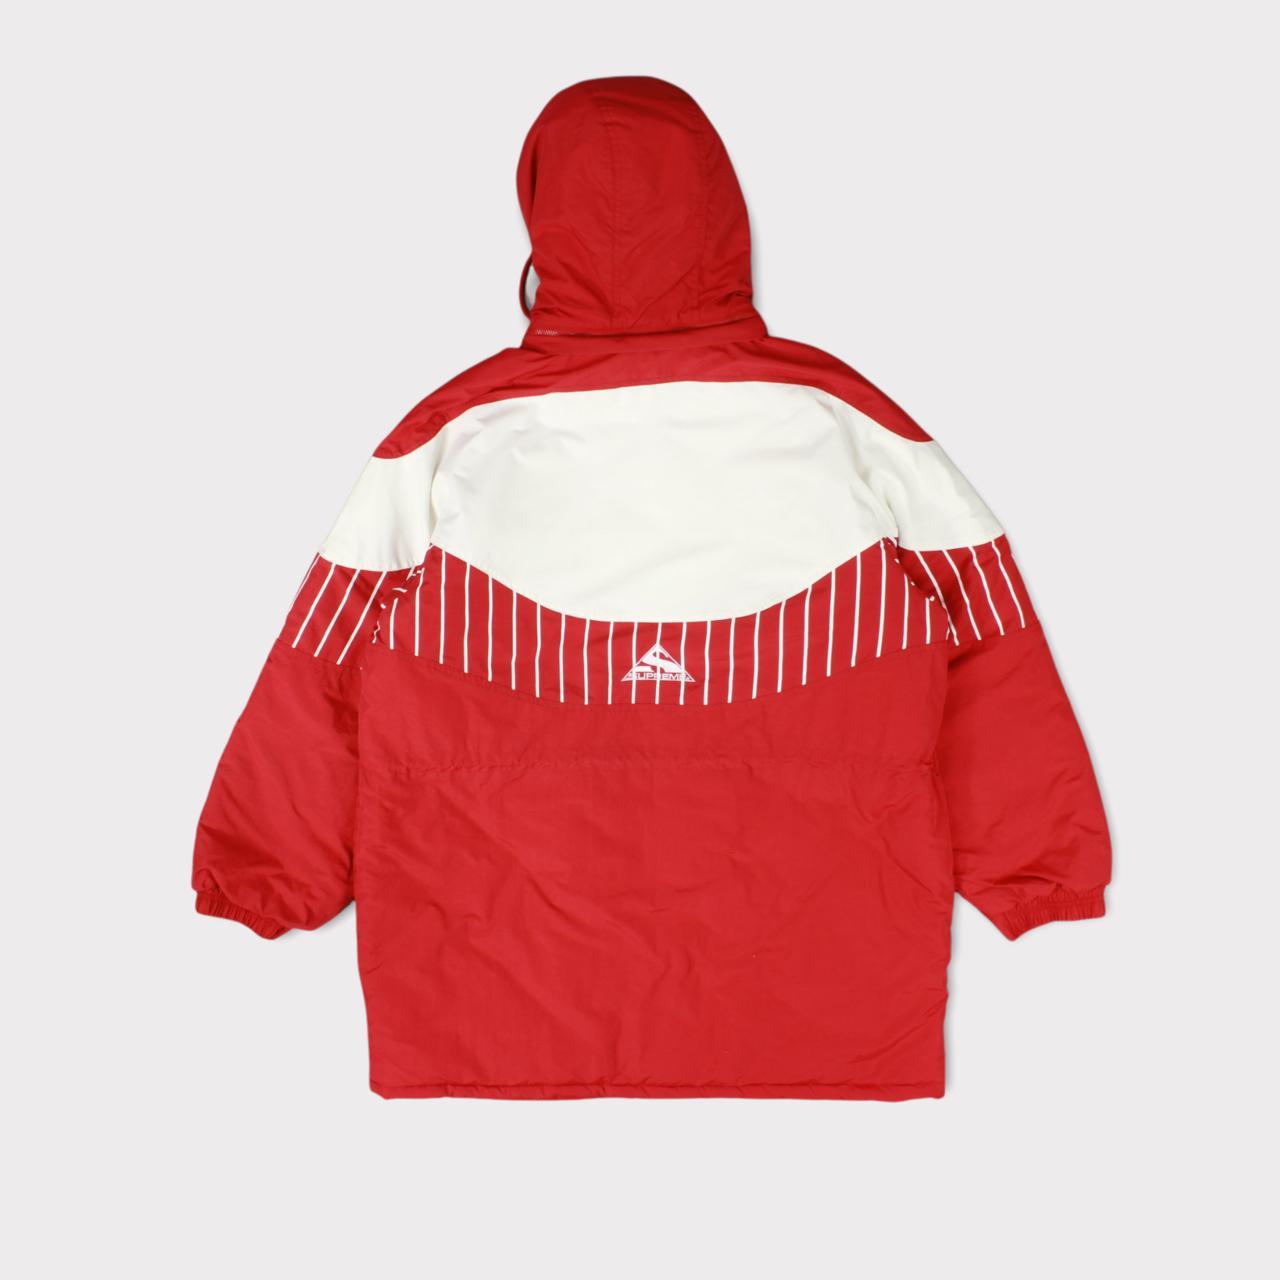 Supreme Men's Red and White Jacket (2)